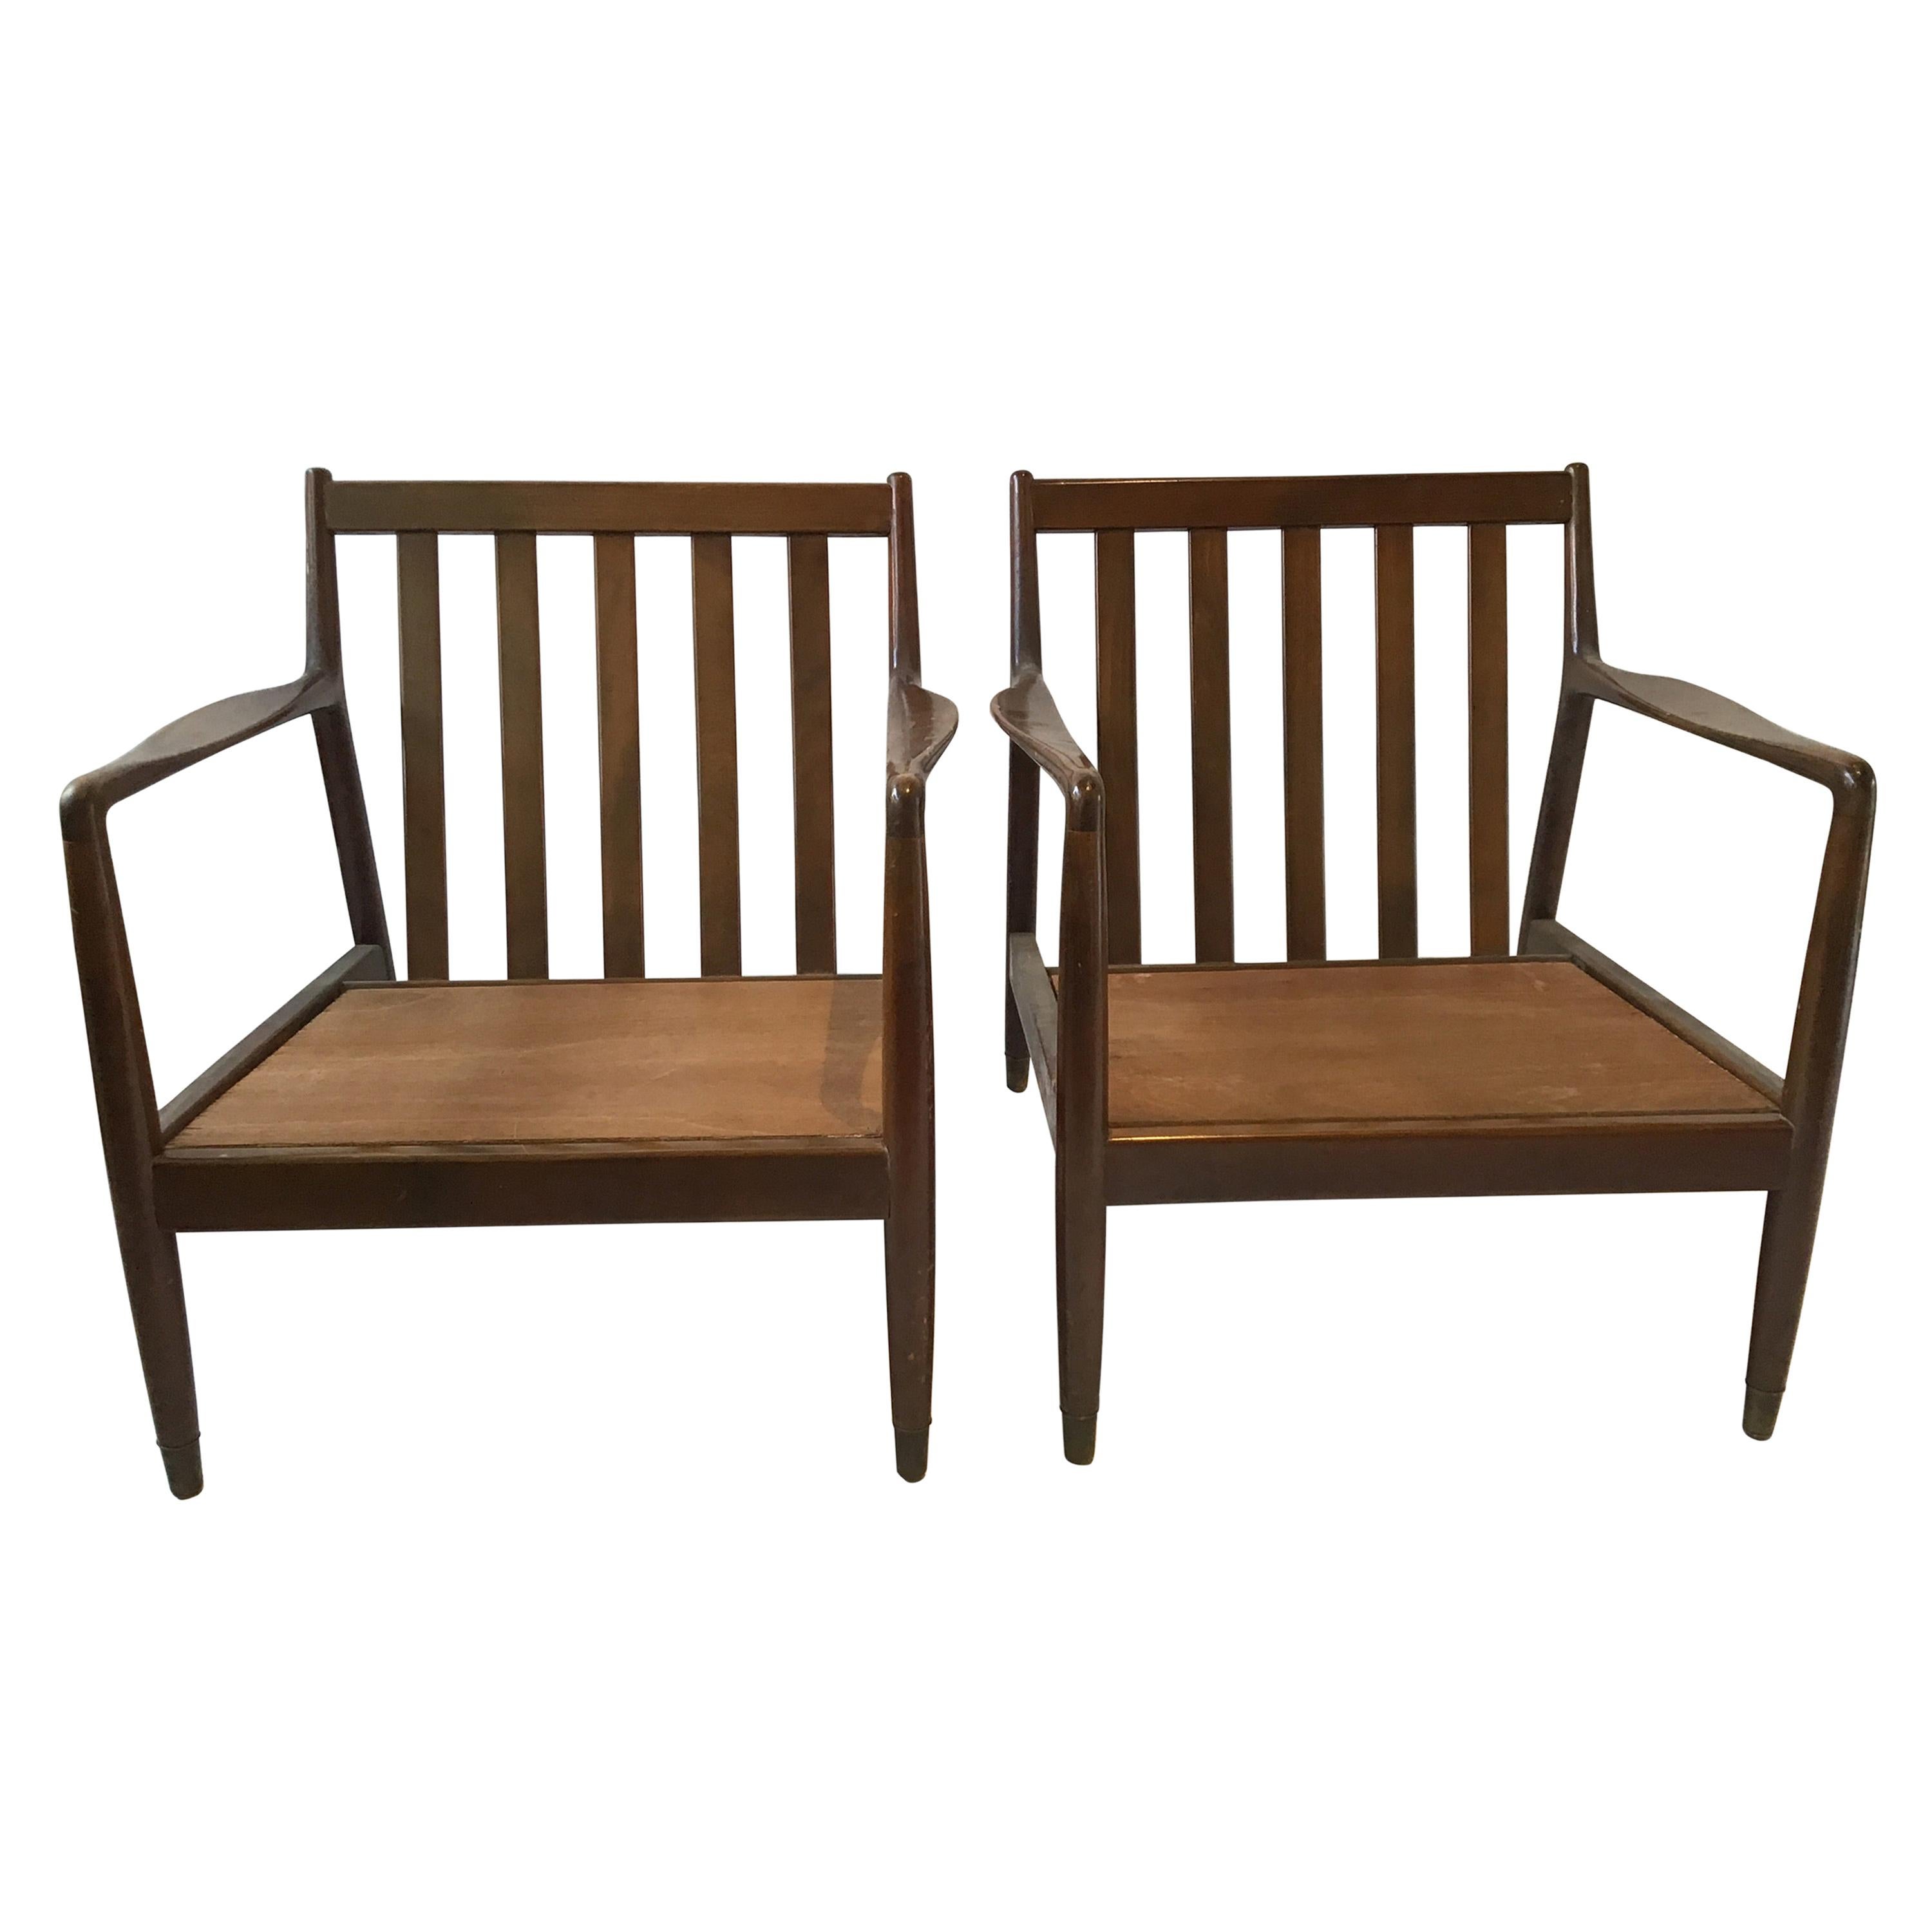 Pair of 1950s Folke Ohlsson Walnut Lounge Chairs for DUX